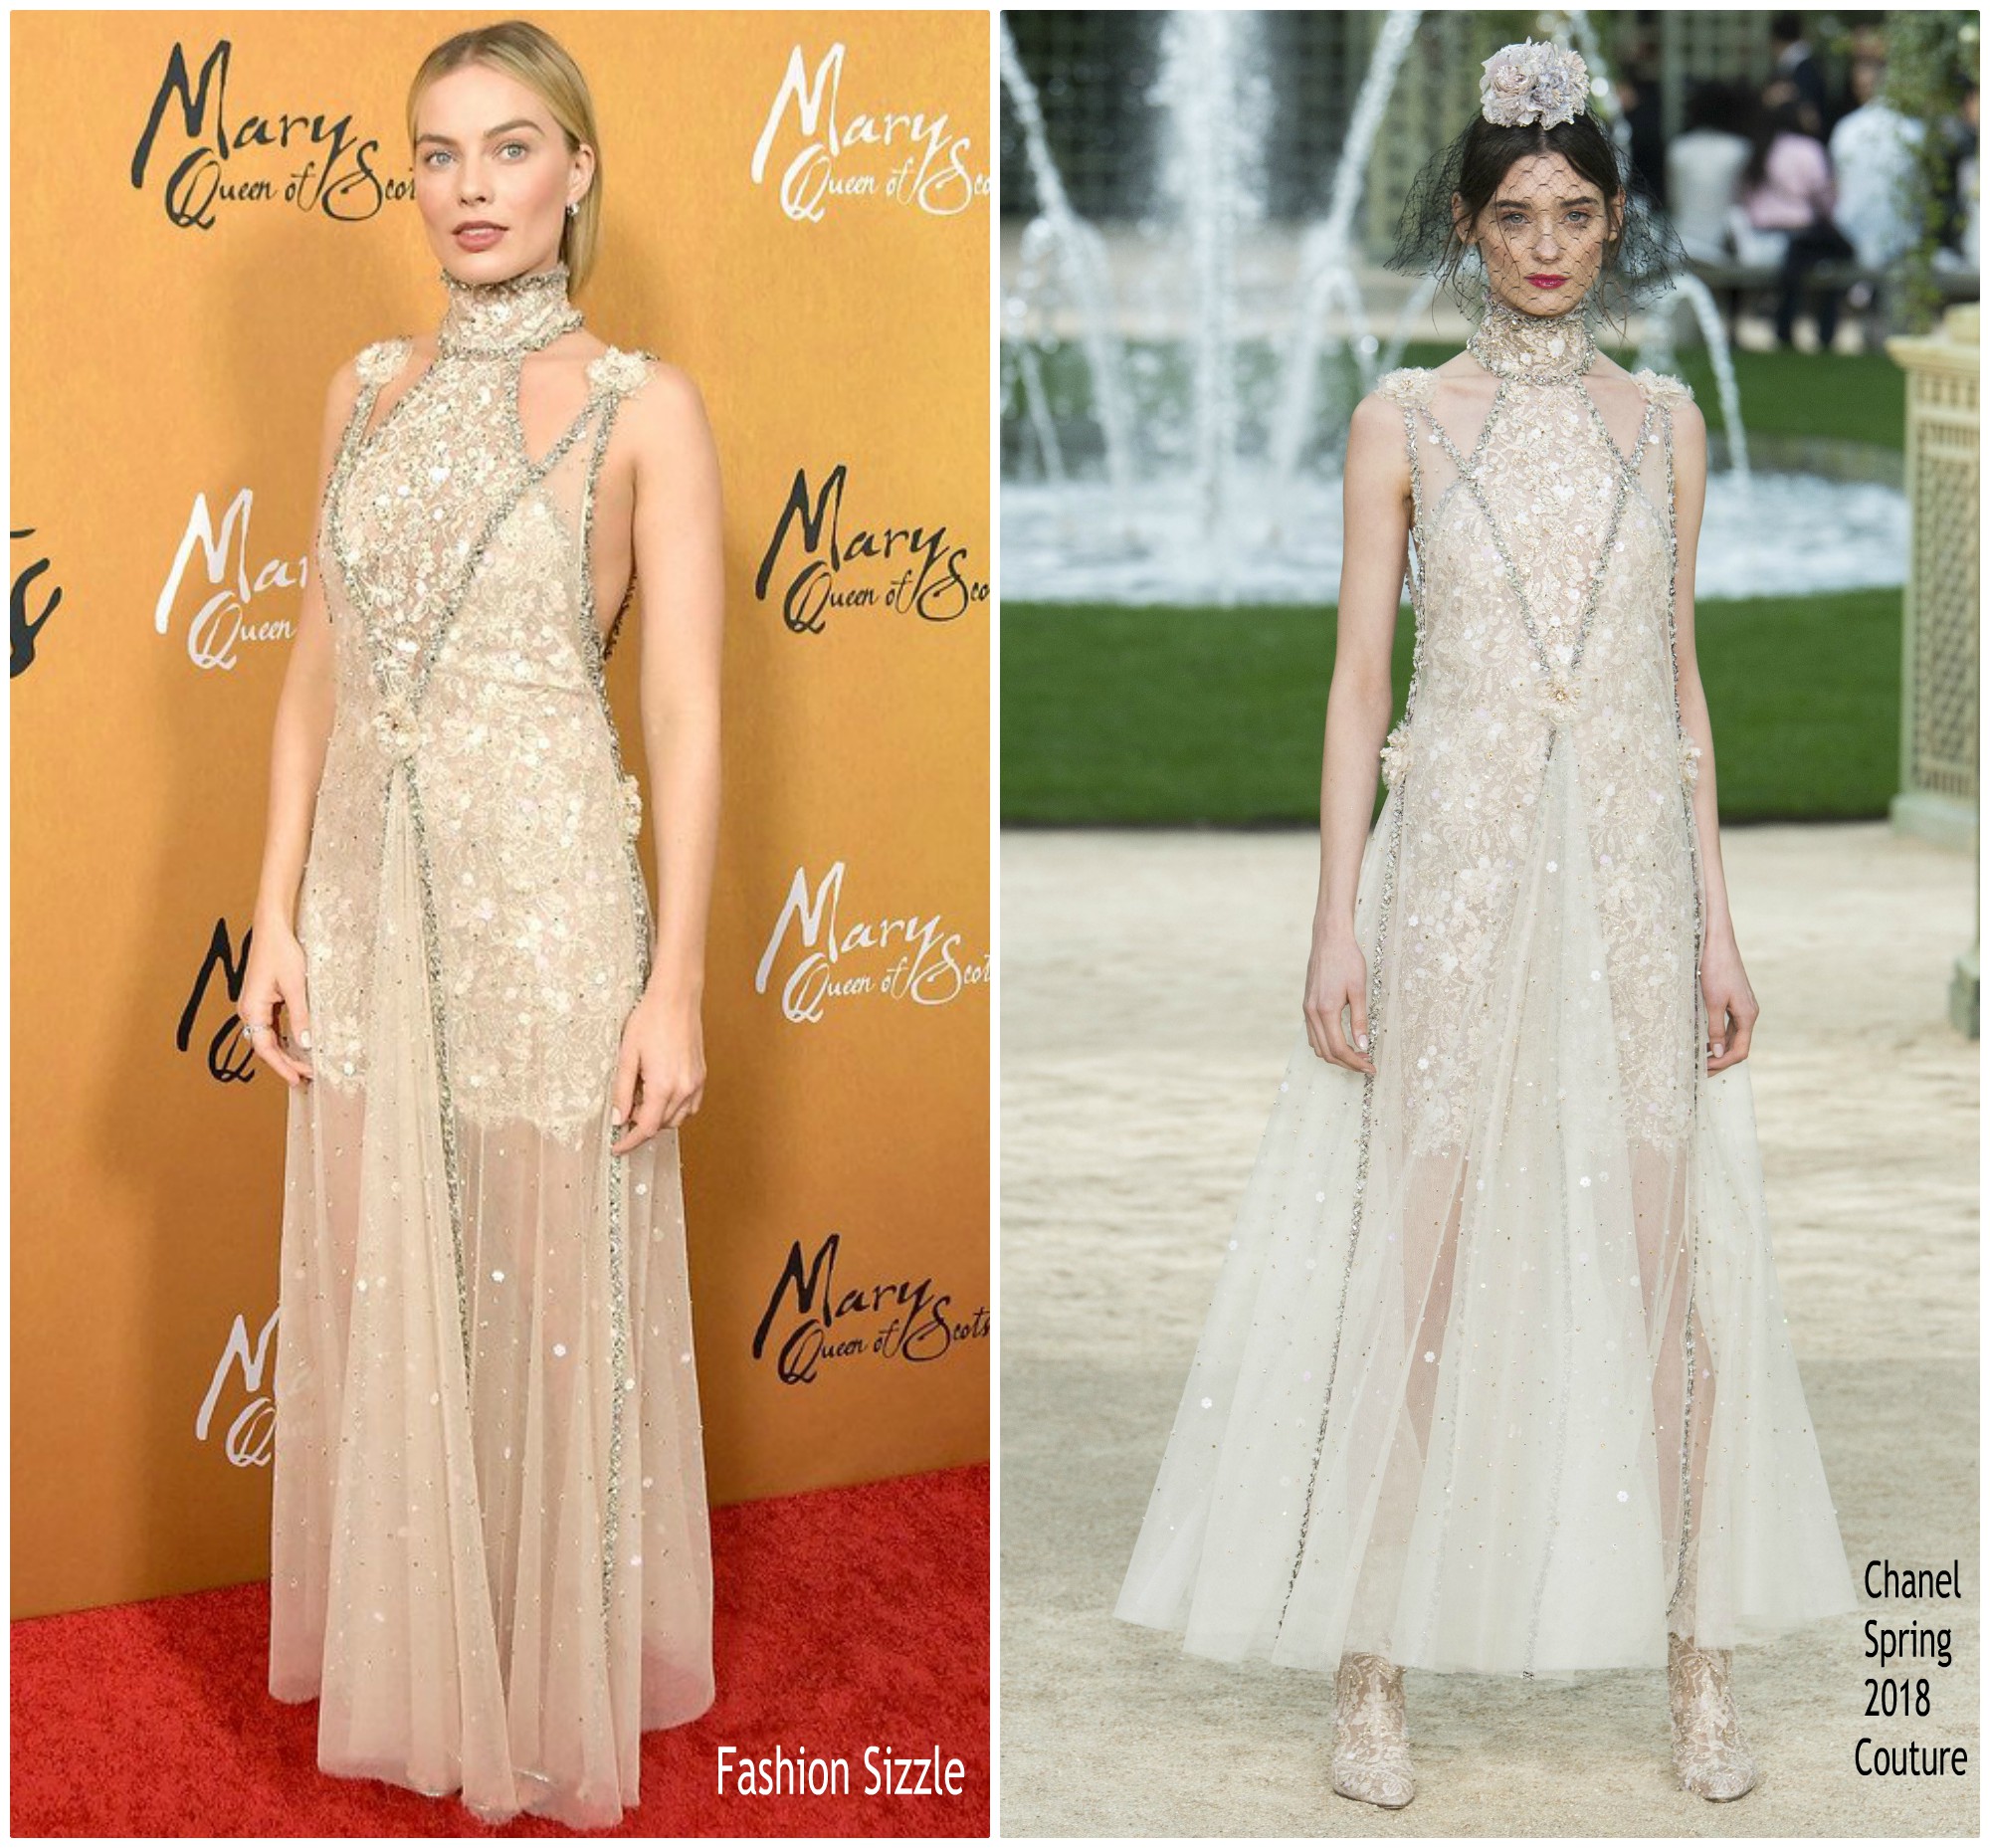 Margot Robbie in Chanel Haute Couture @ ‘Mary Queen of Scots’ New York Premiere